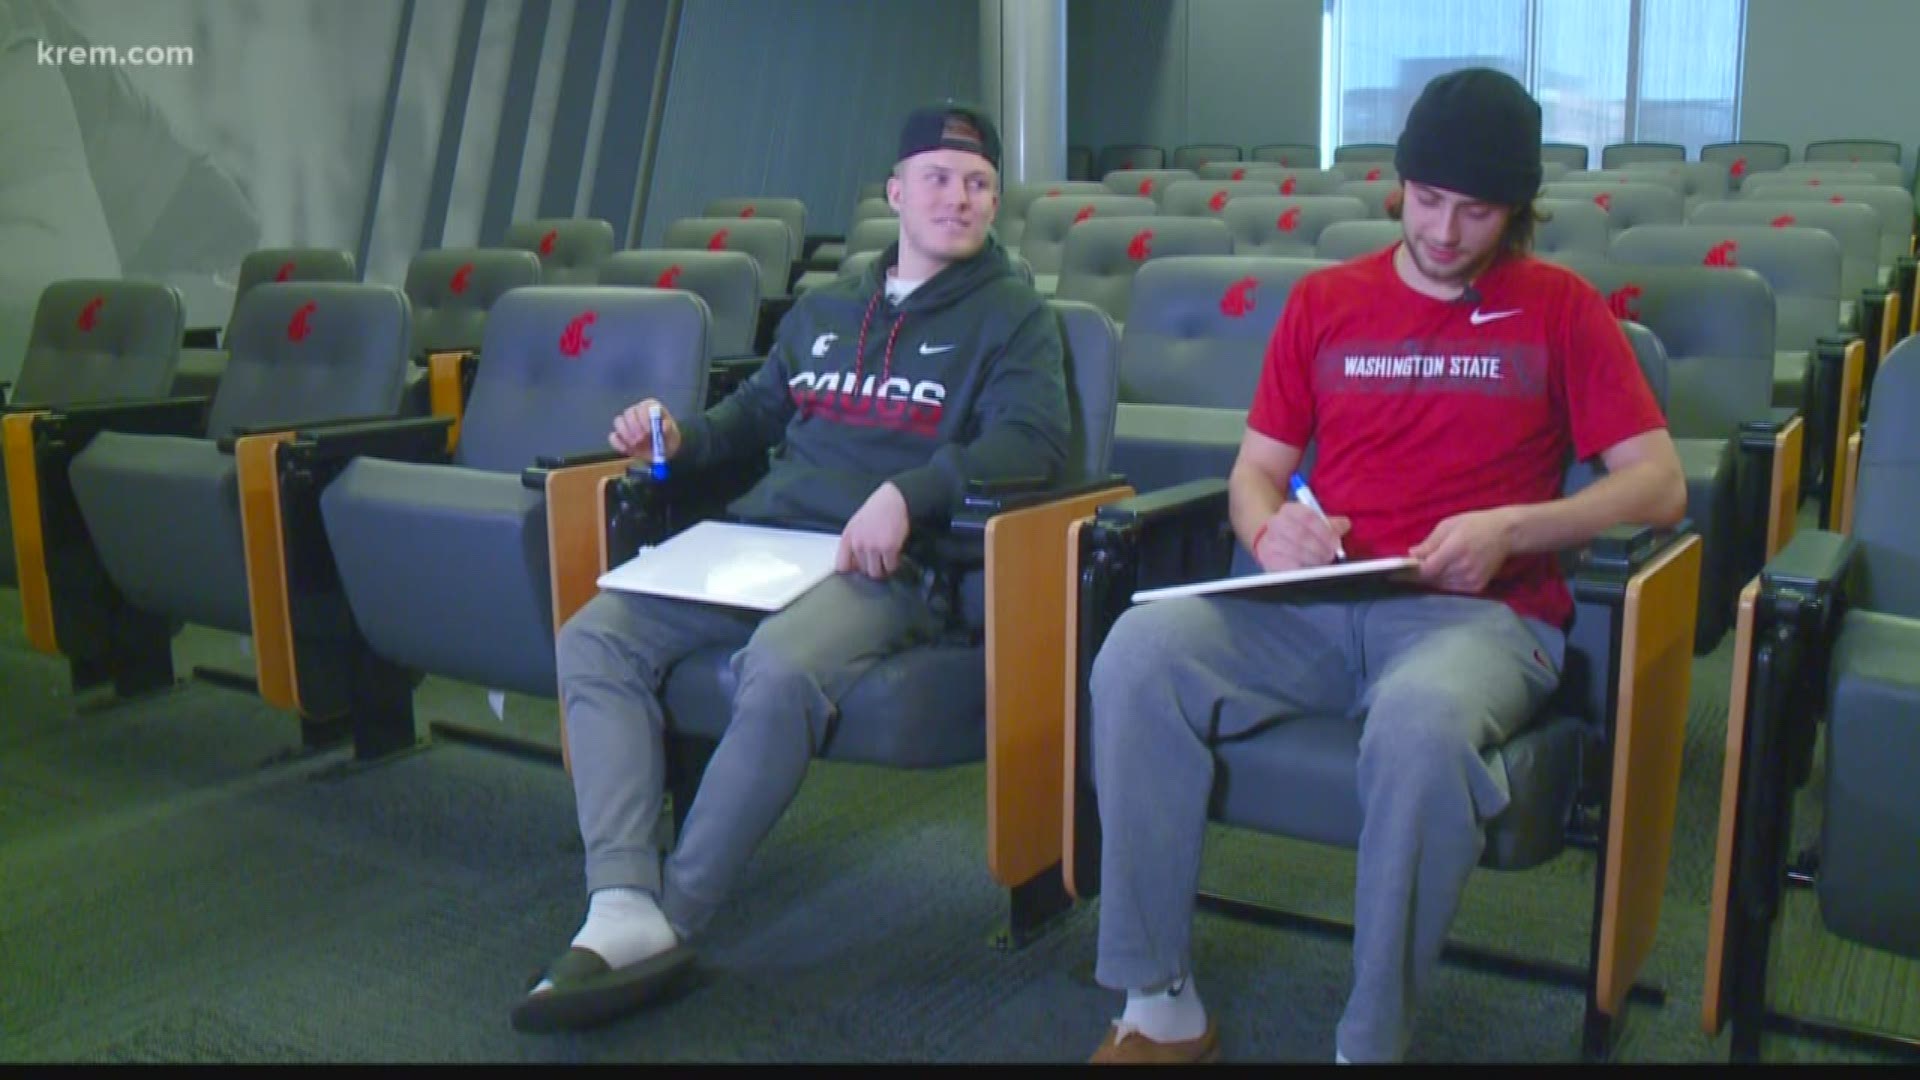 WSU QB Anthony Gordon and RB Max Borghi, who are roommates, battle it out to see who knows the other better.